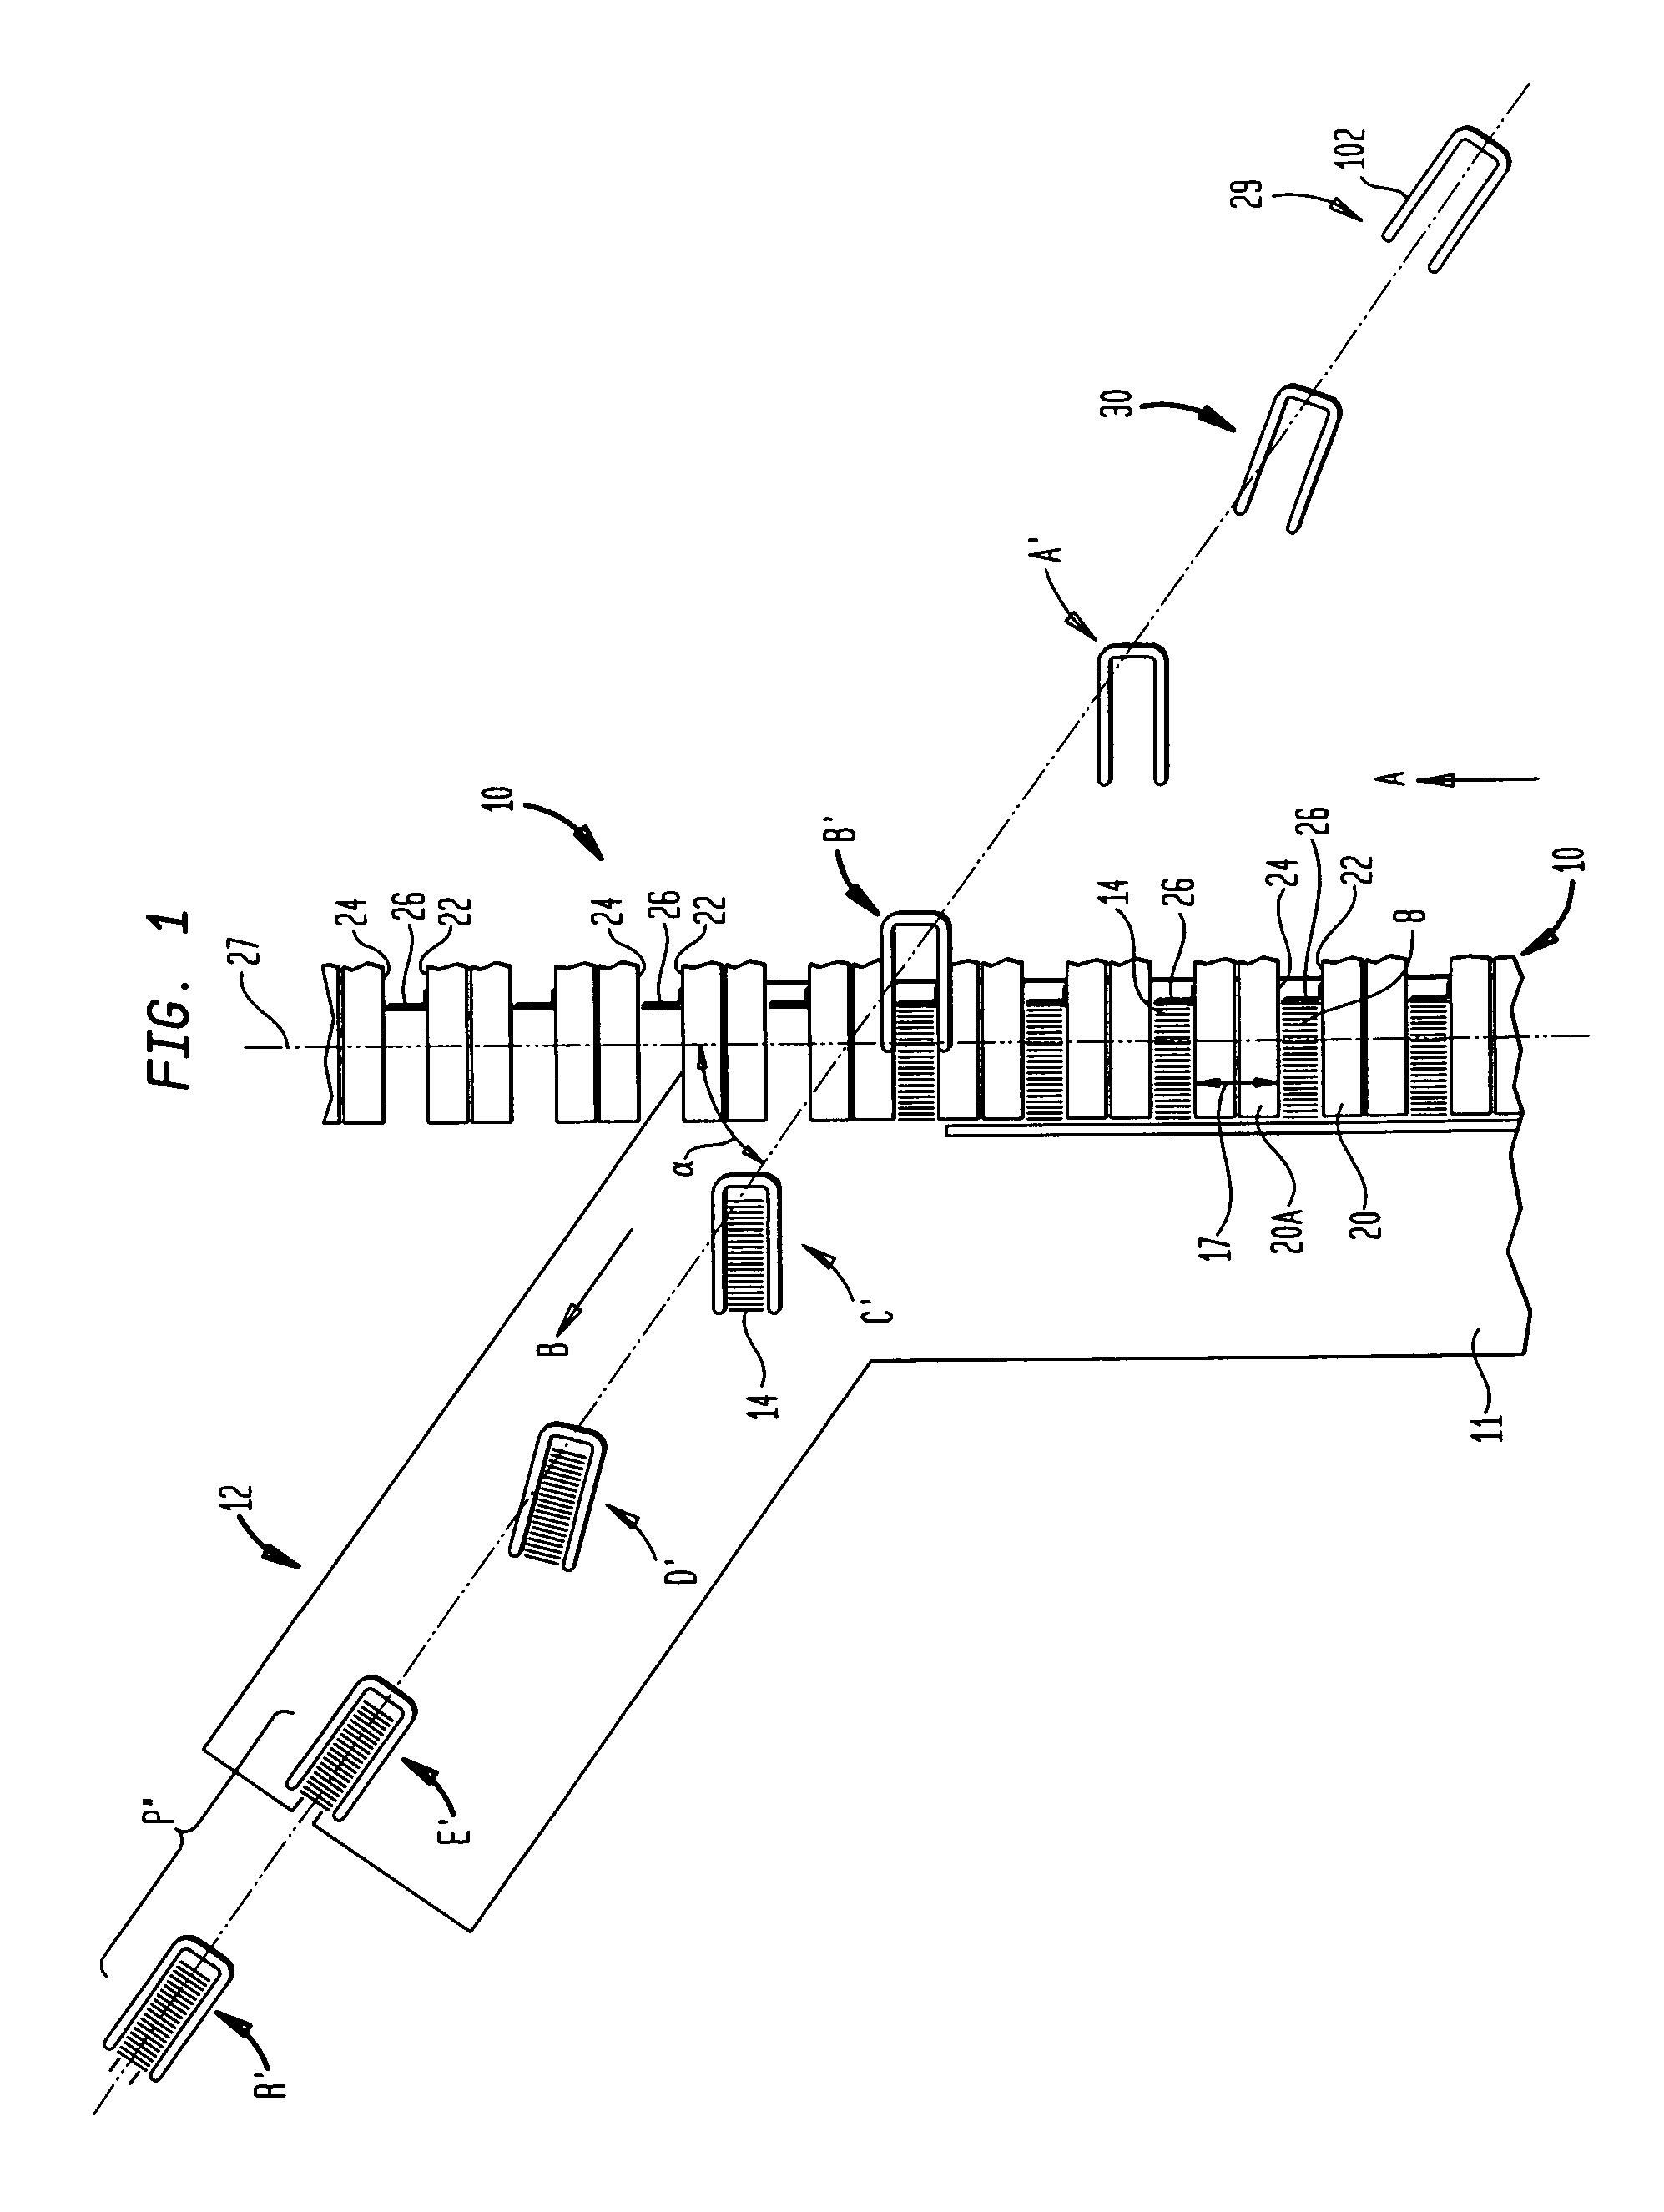 Continuous motion product transfer system with conveyors